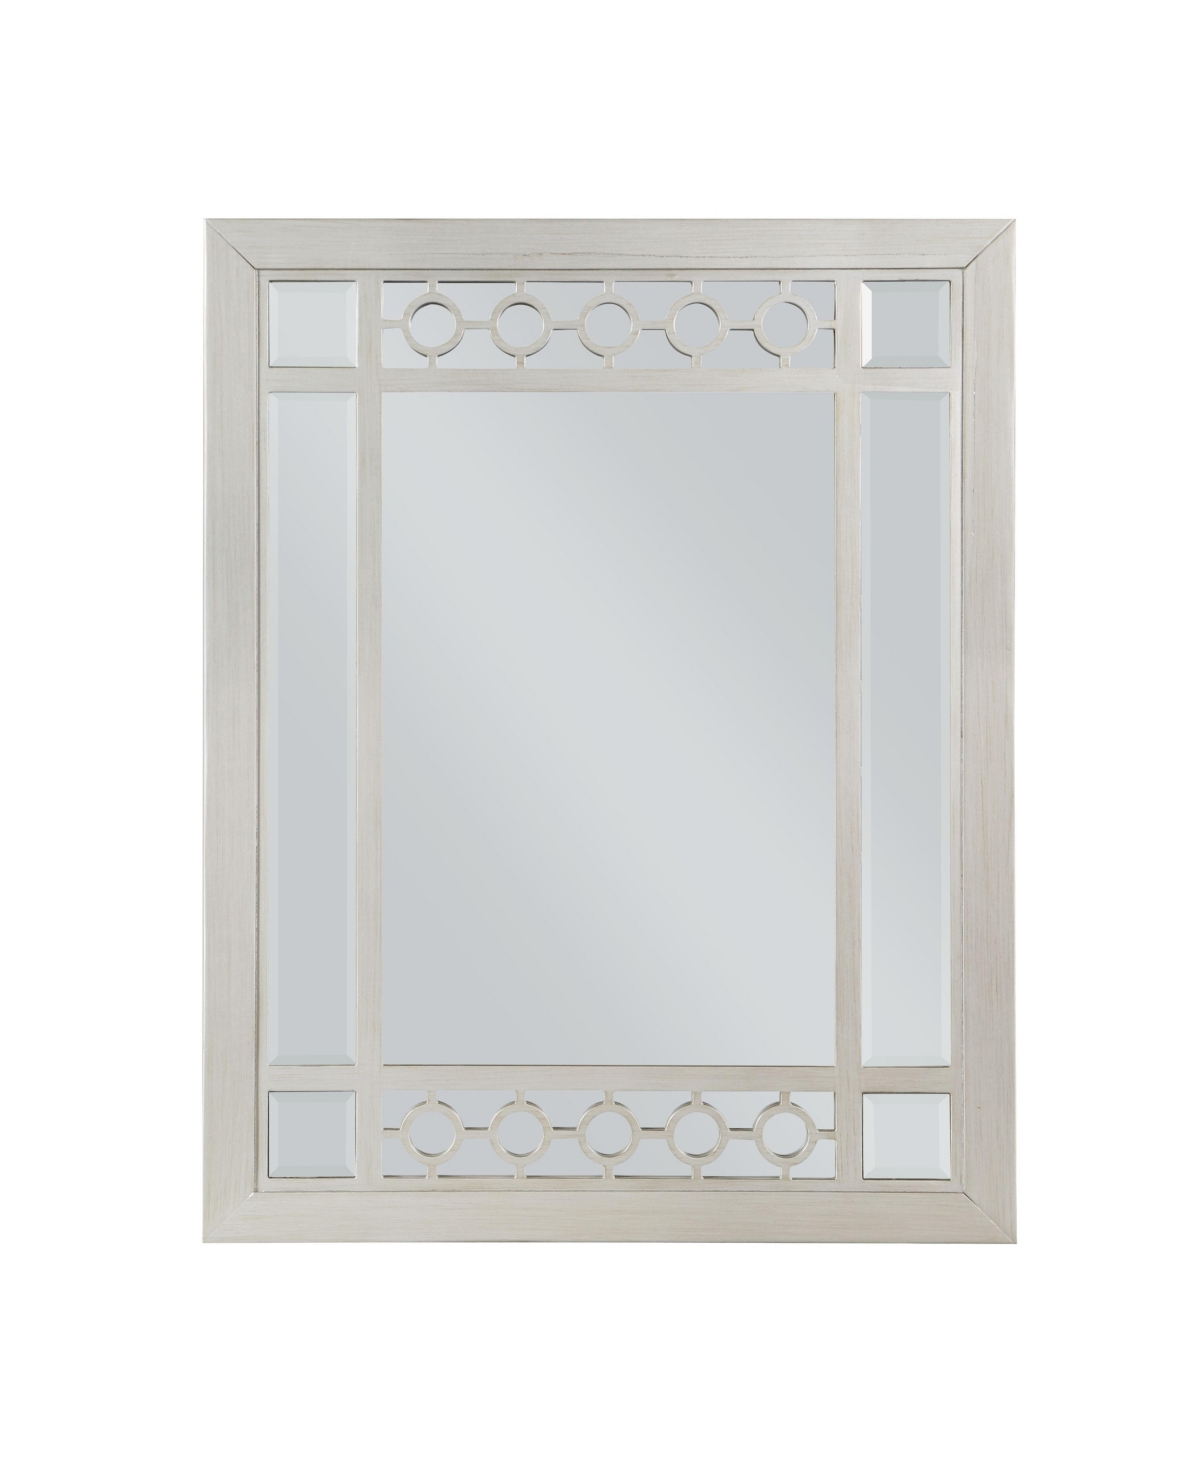 Varian Mirror, Silver & Mirrored Finish - Brown